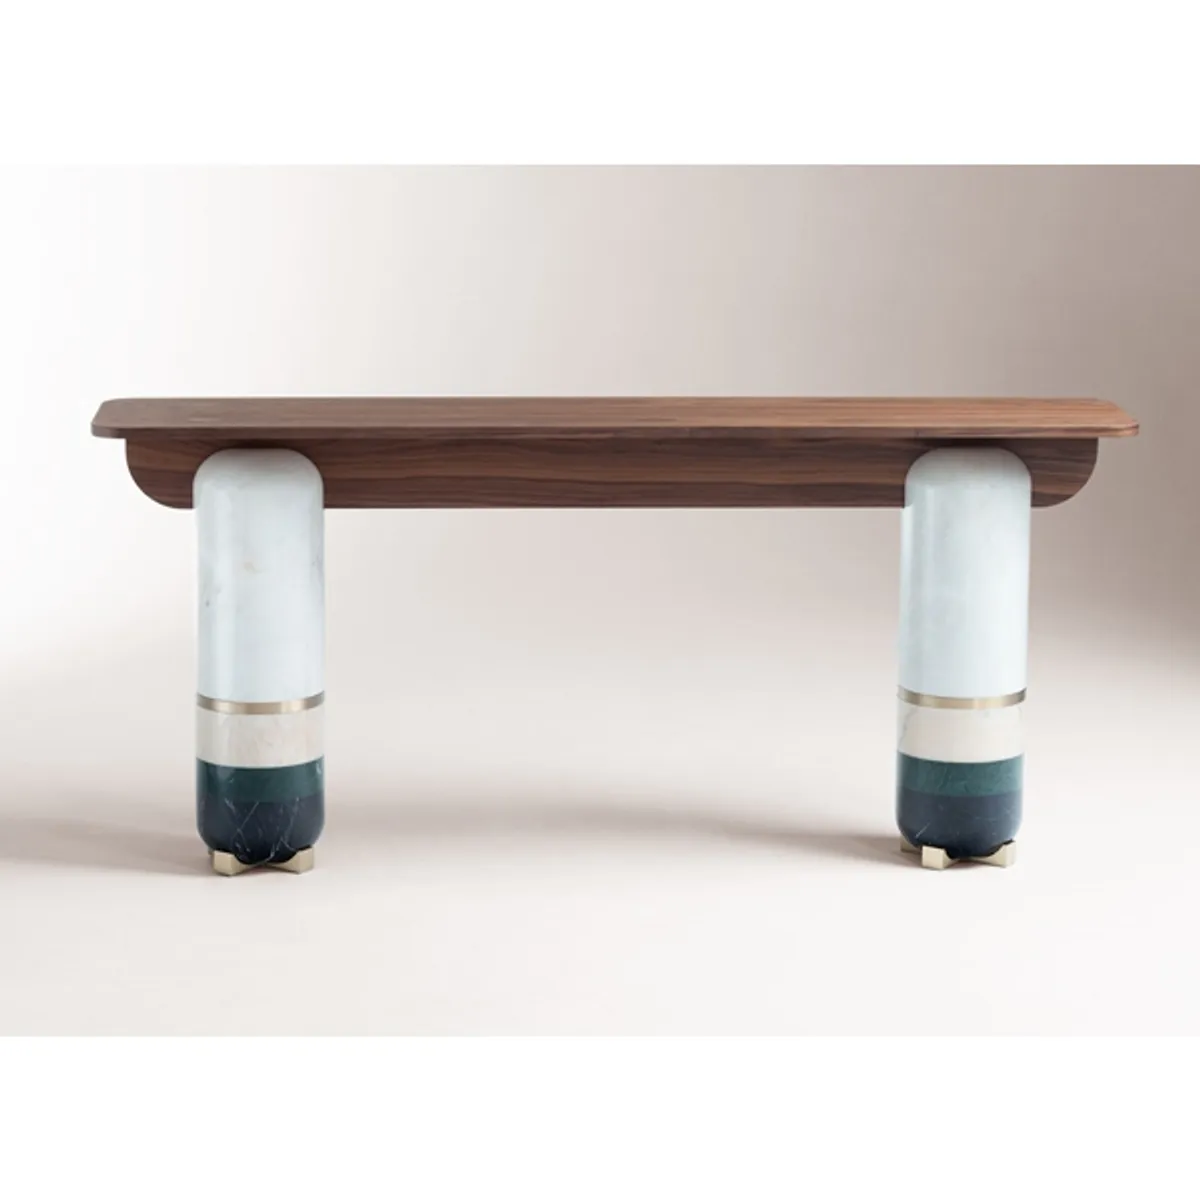 Grandiose console table Inside Out Contracts5